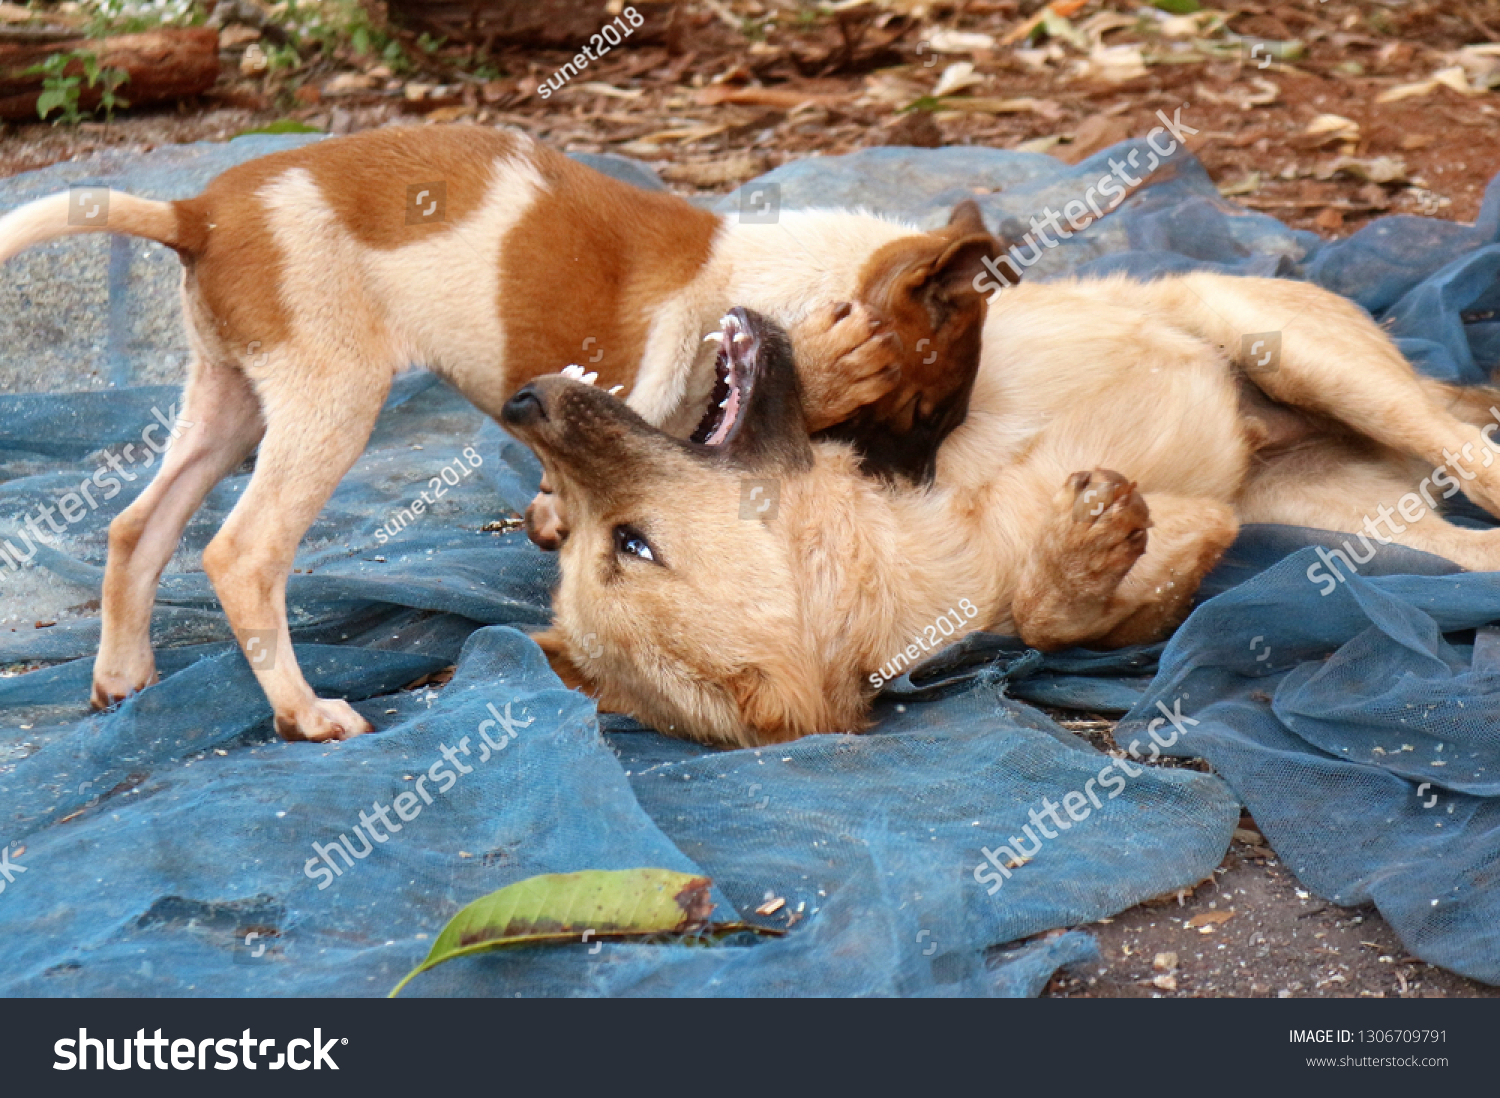 Two Dogs Biting Each Other Stock Photo Edit Now 1306709791